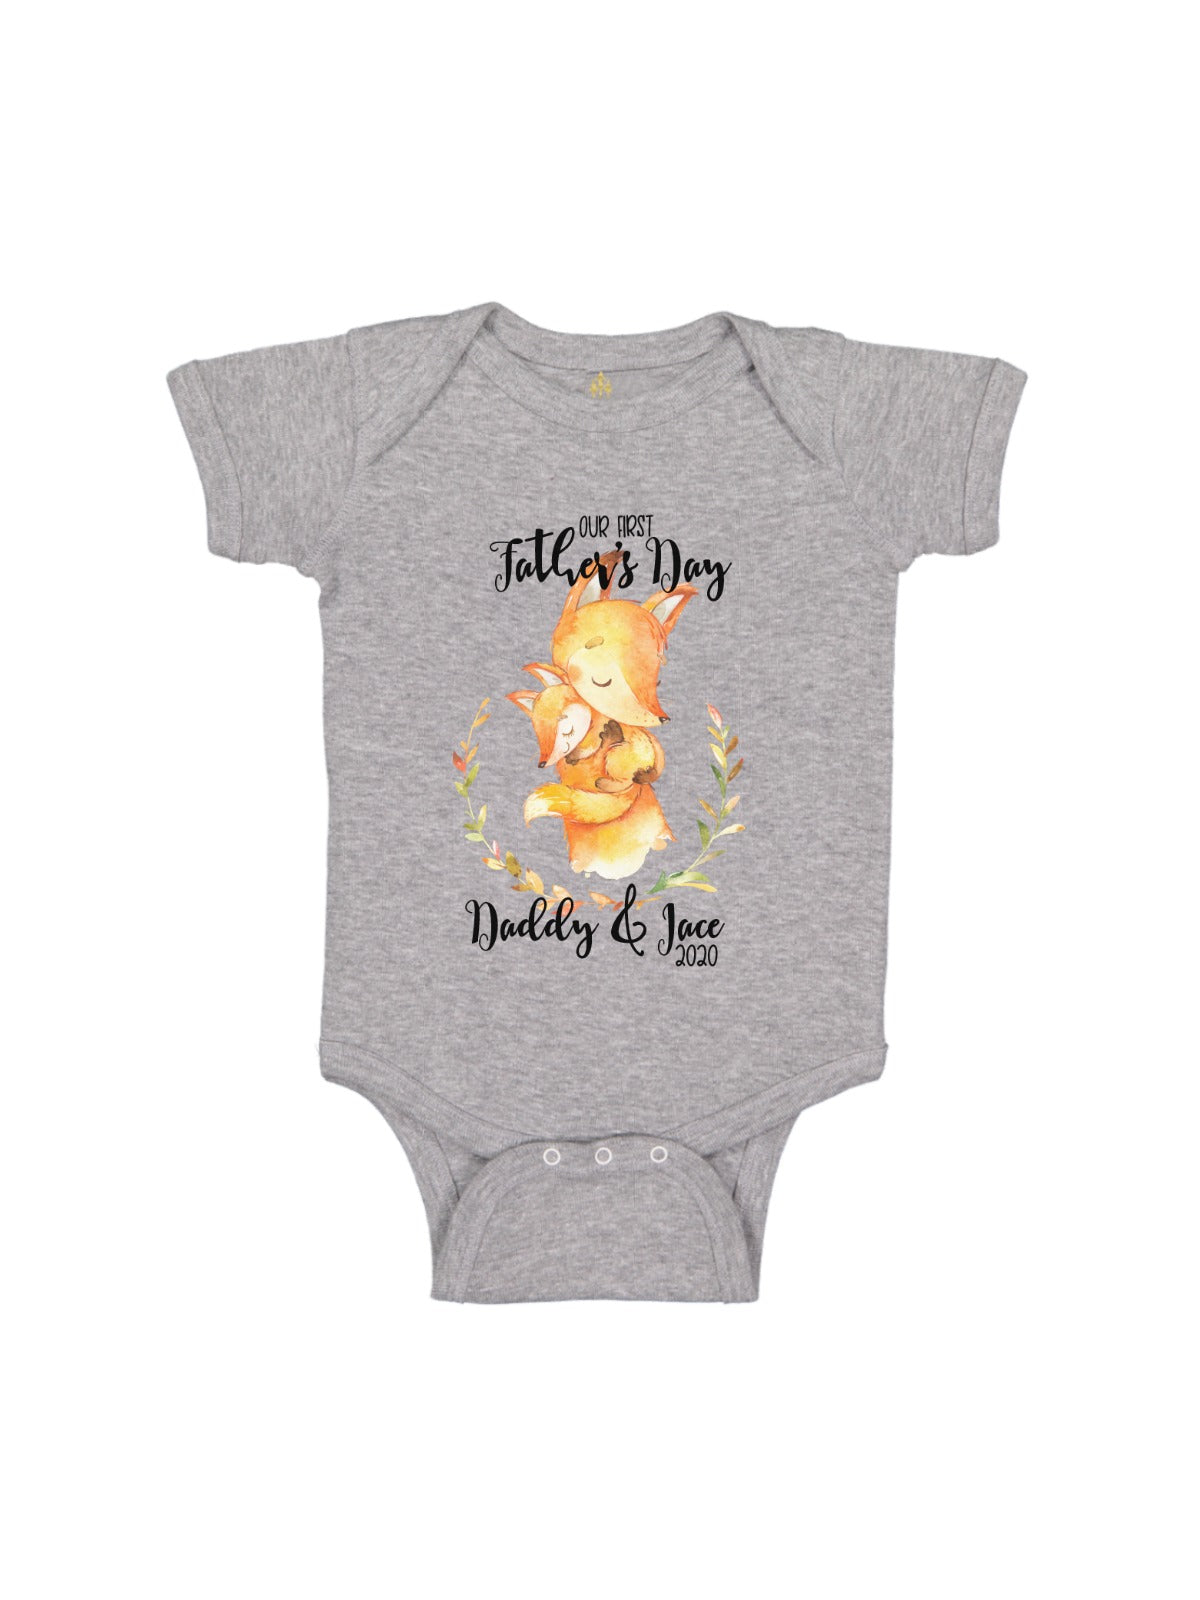 personalized our first fathers day 2020 shirts